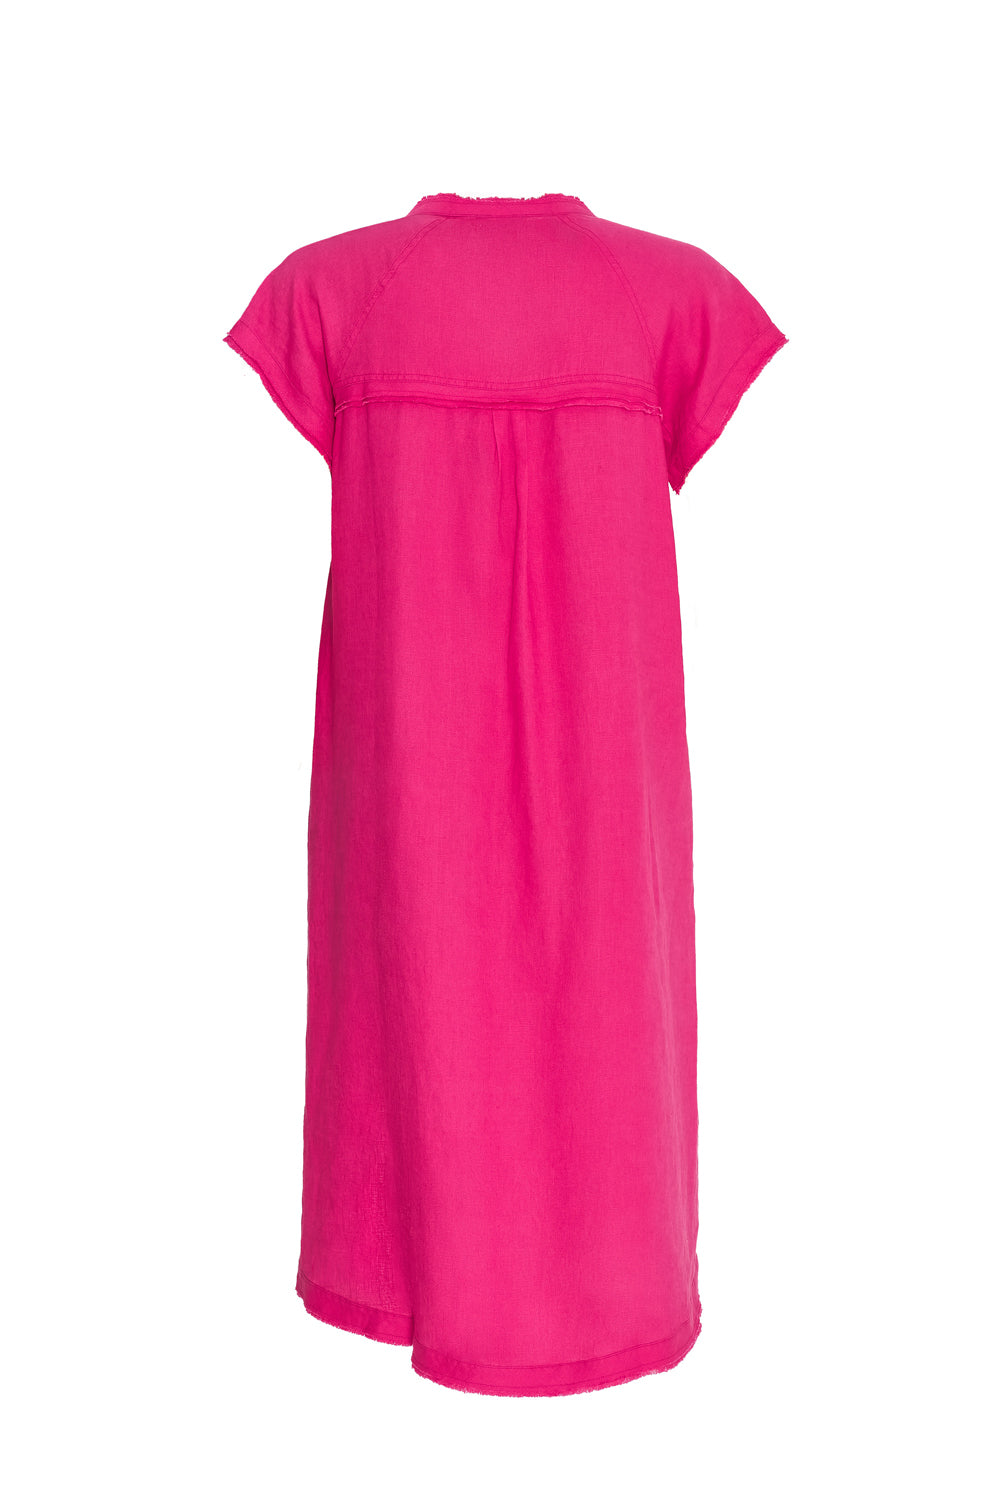 Madly Sweetly by Loobies Story Linen Let Live Shift Dress Raspberry Ms832pl